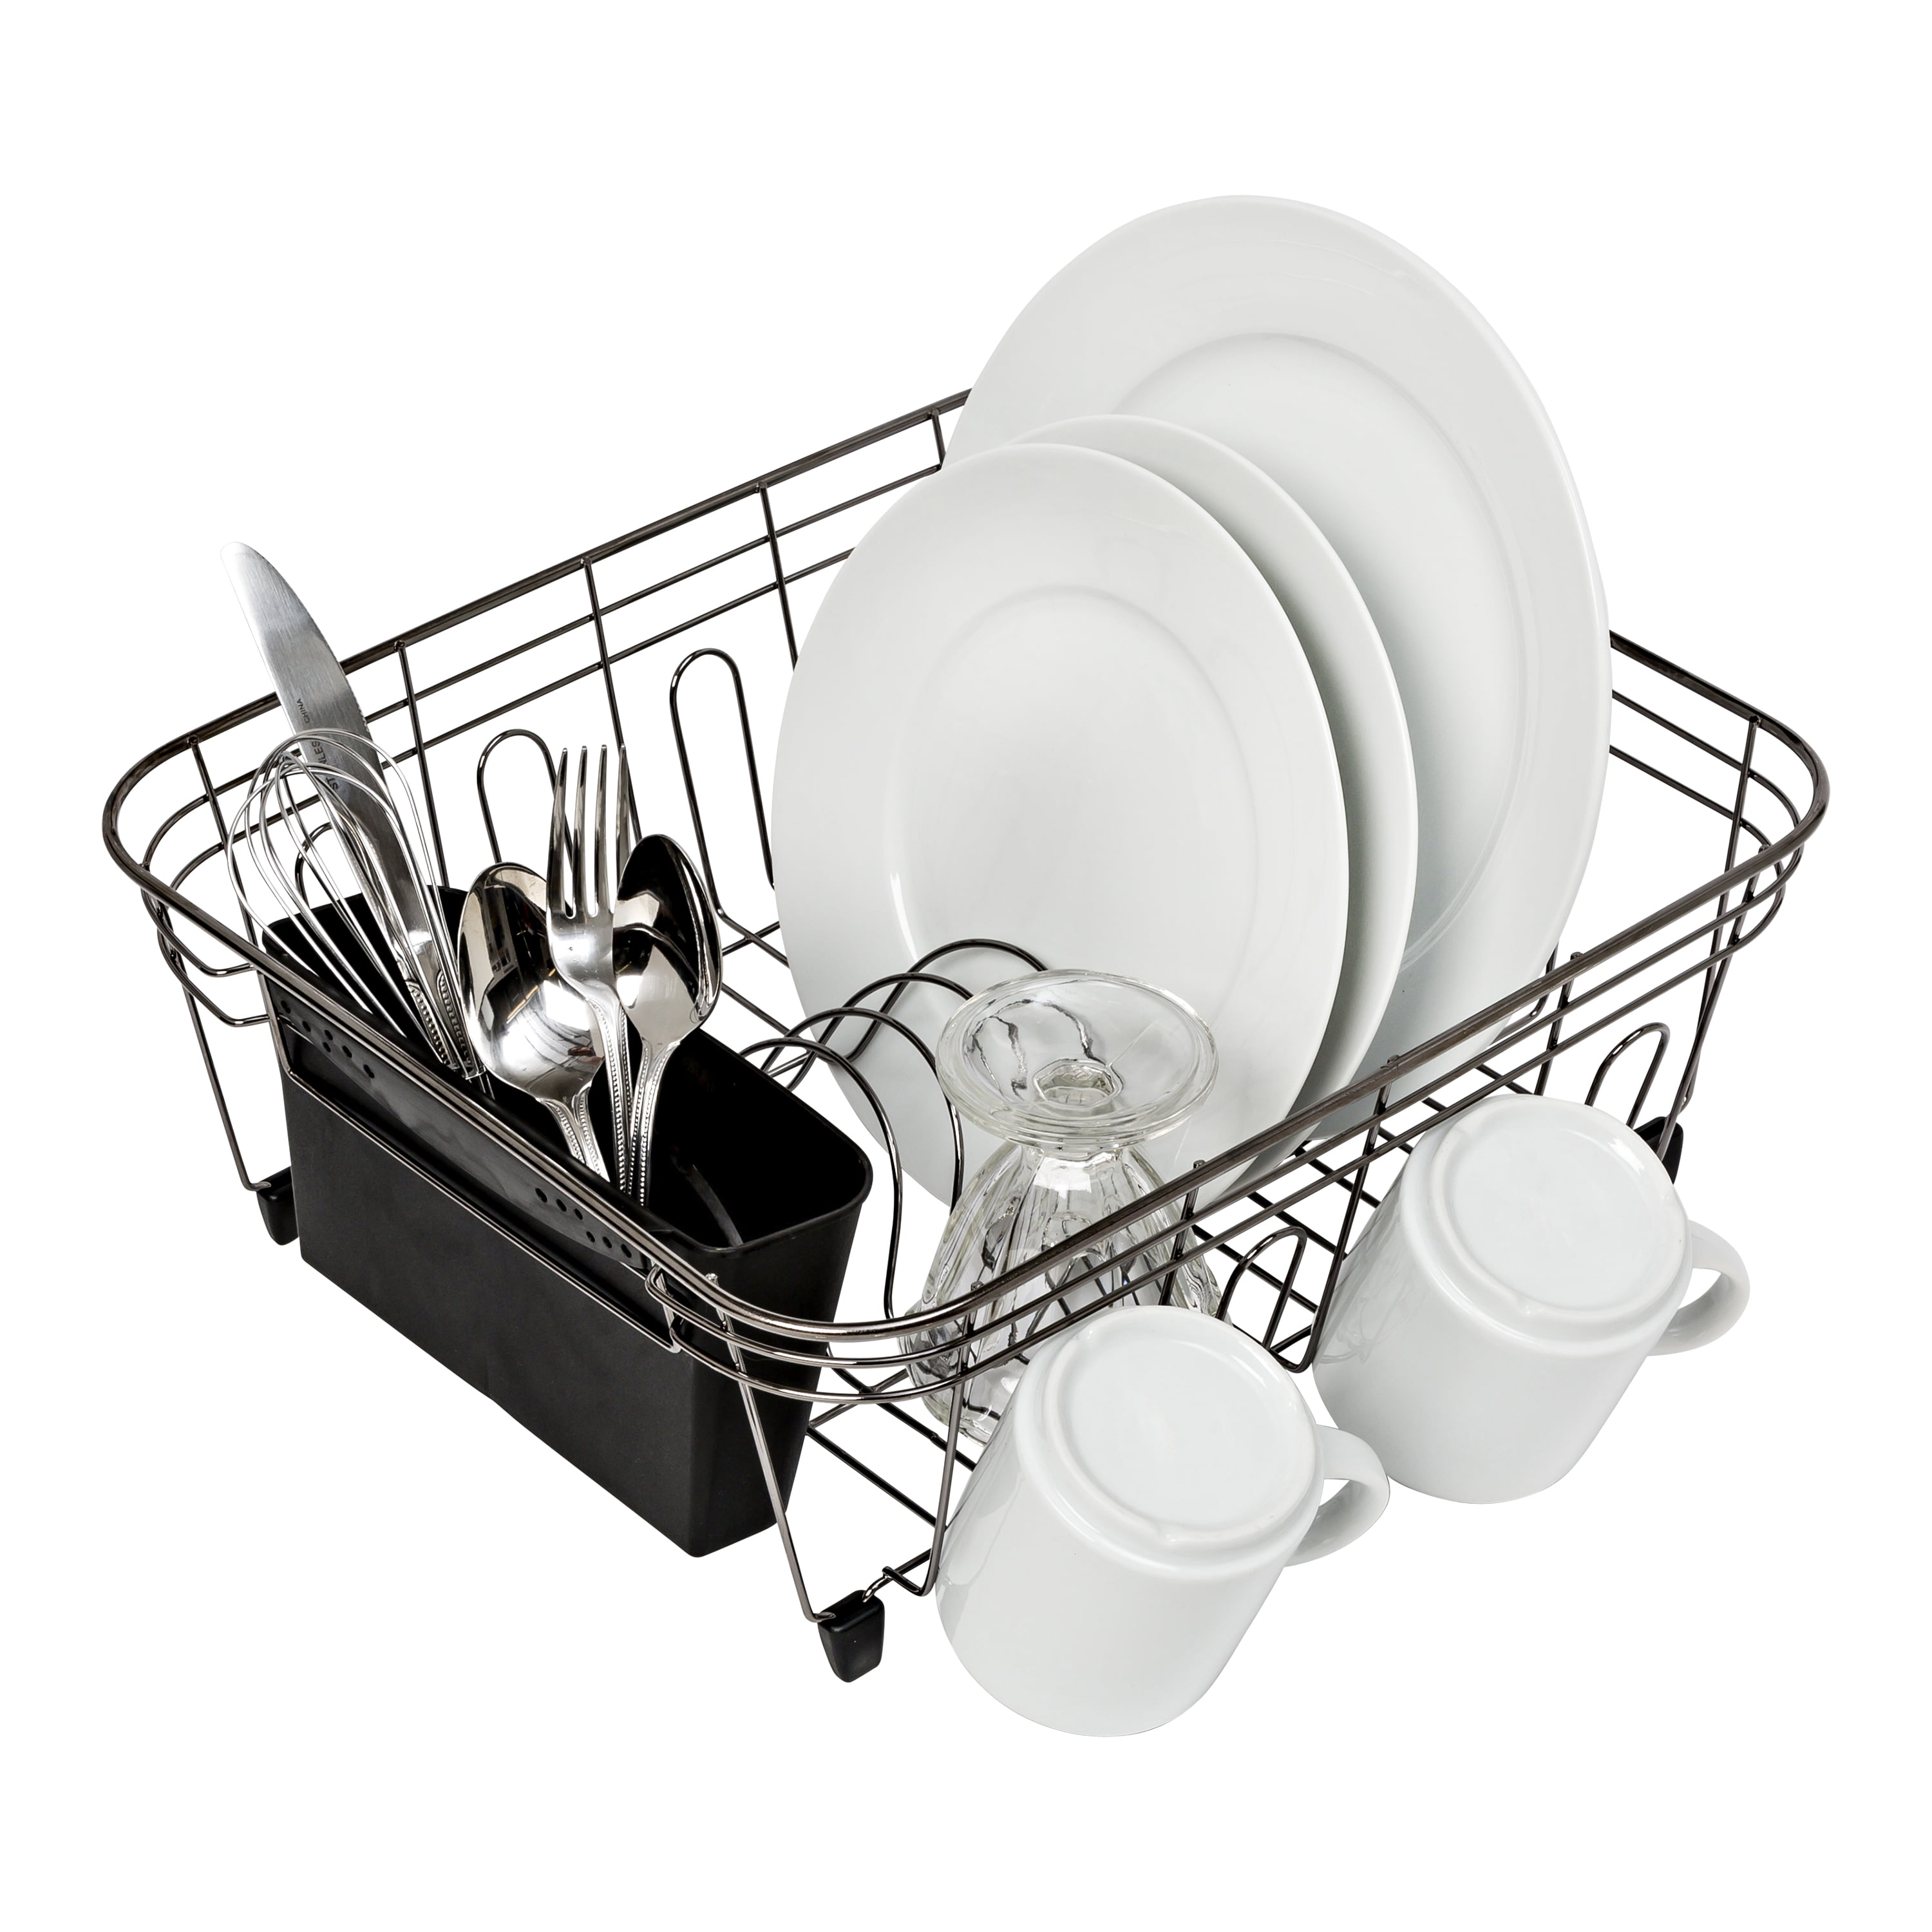 happimess Compact 17.25 Fingerprint-Proof Stainless Steel Dish Rack with Wine Glass Holder, Stainless Steel/Black